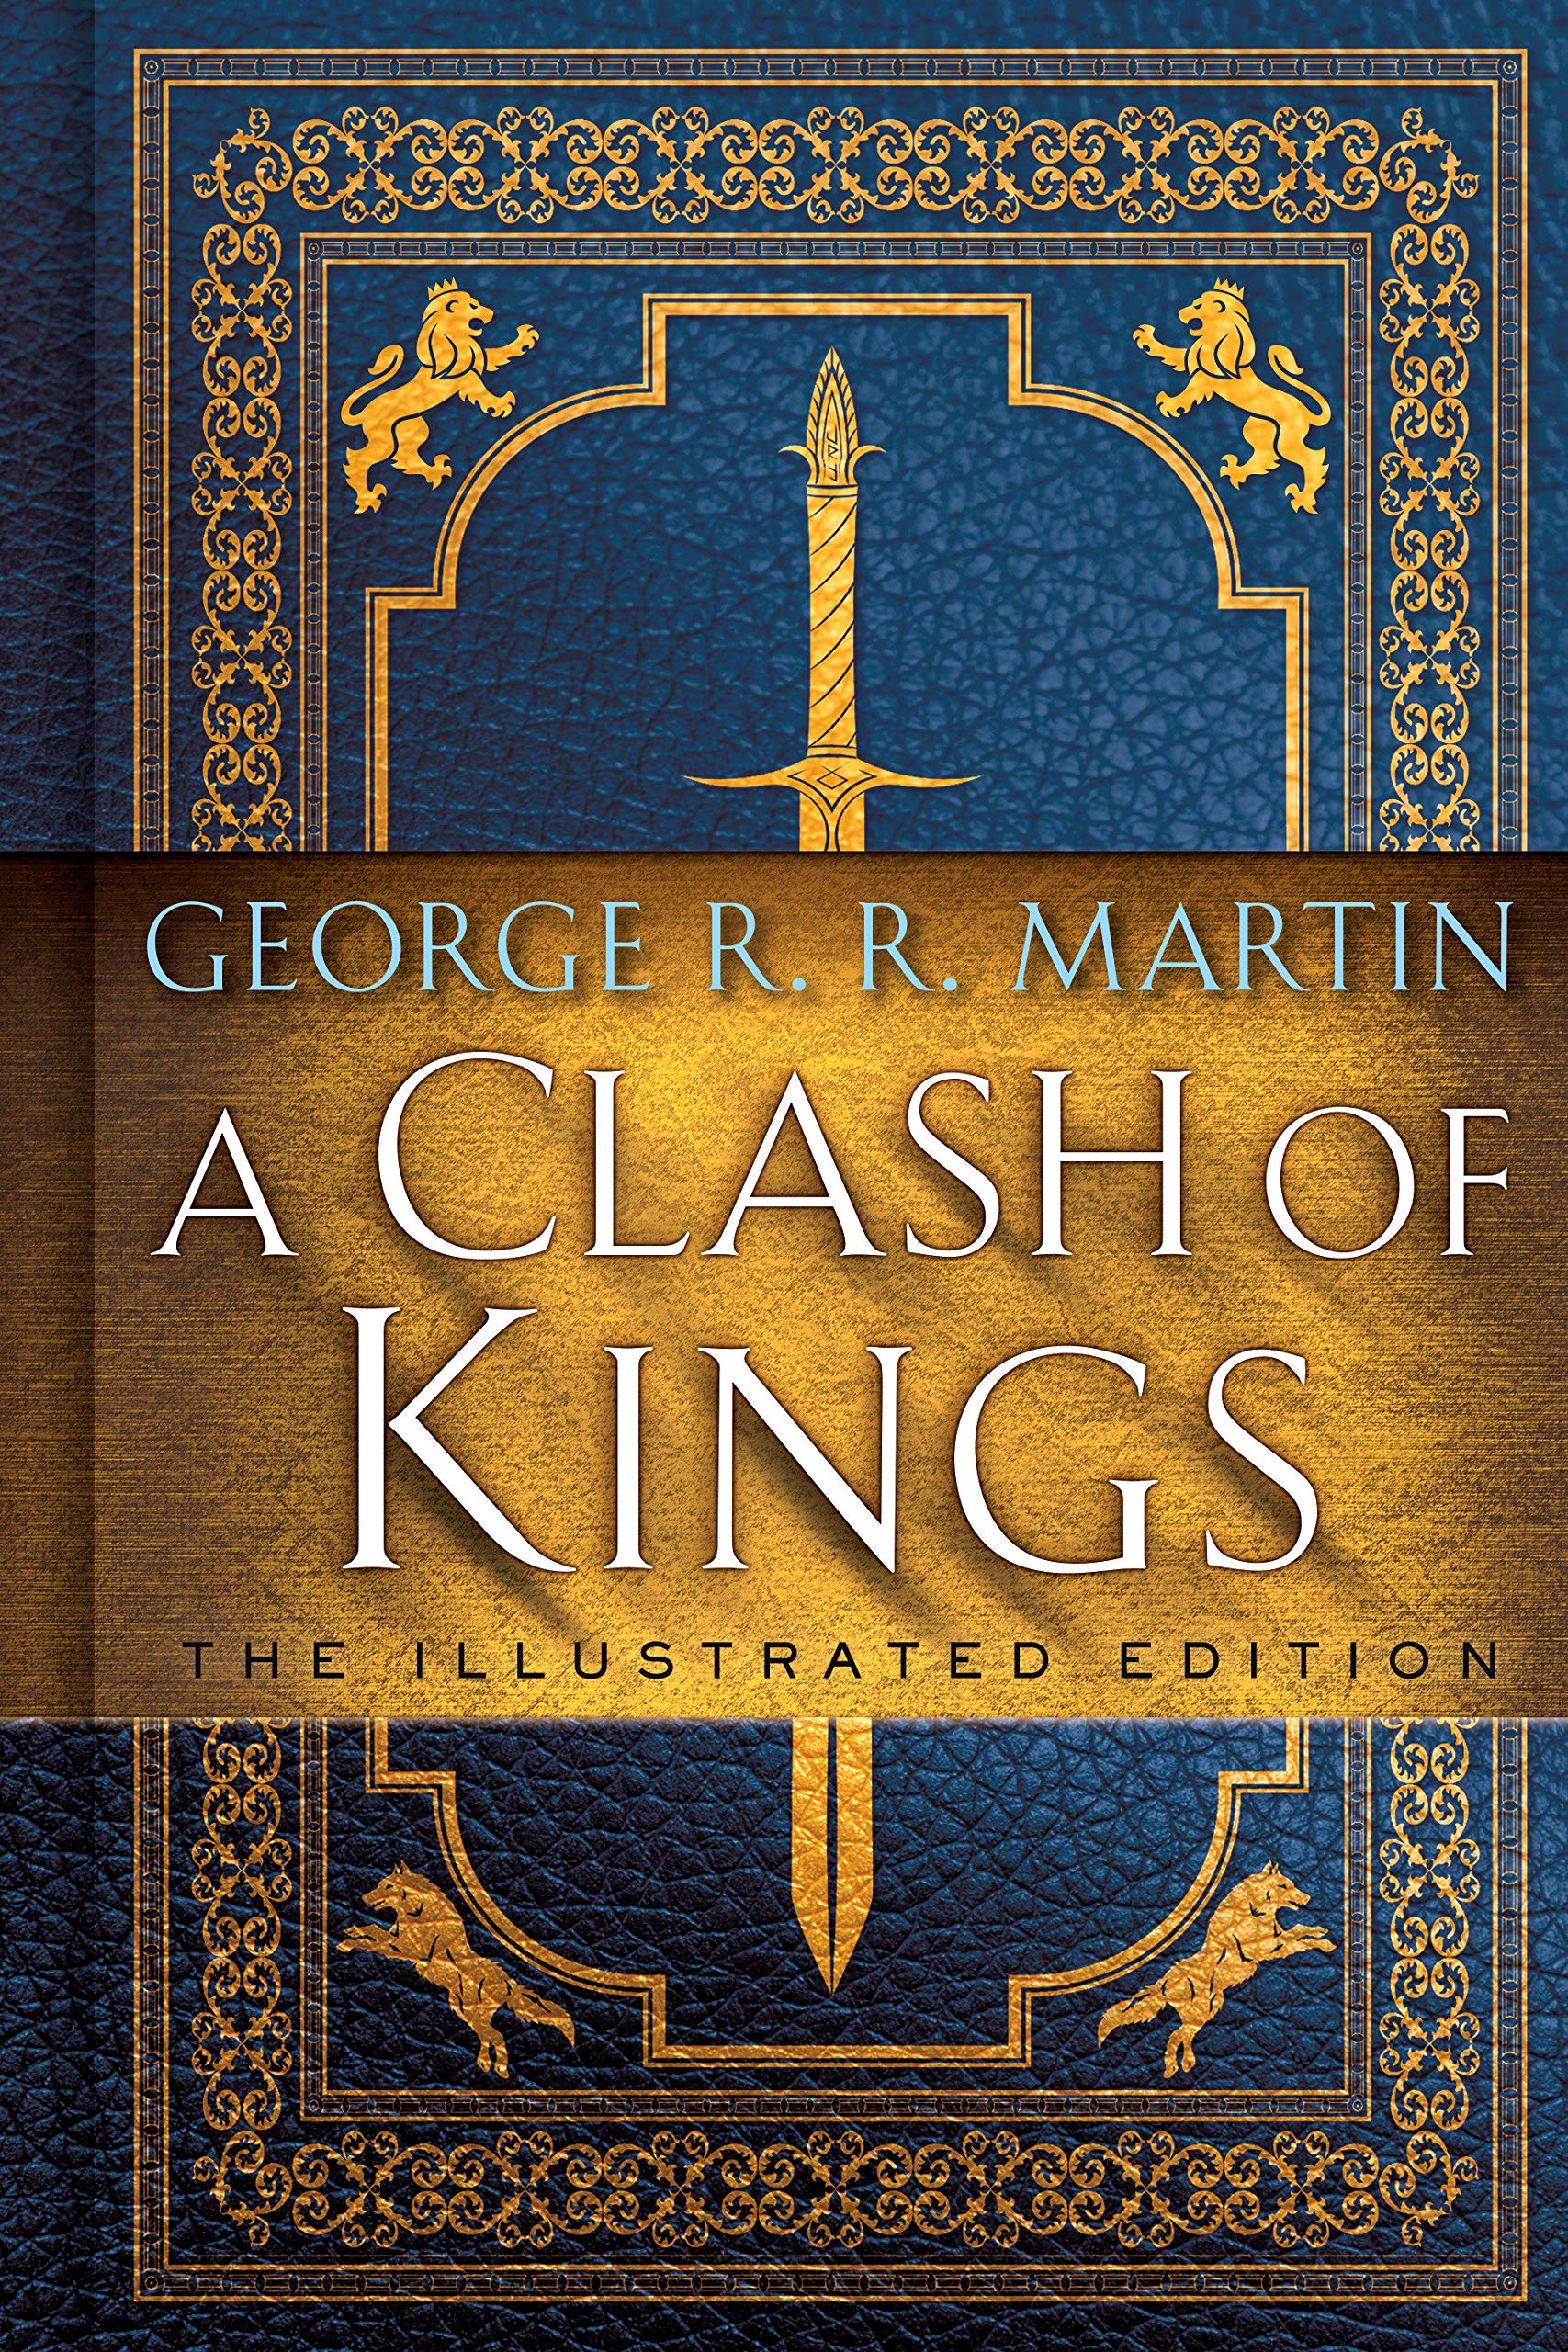 Clash of Kings: The Illustrated Edition | George R. R. Martin